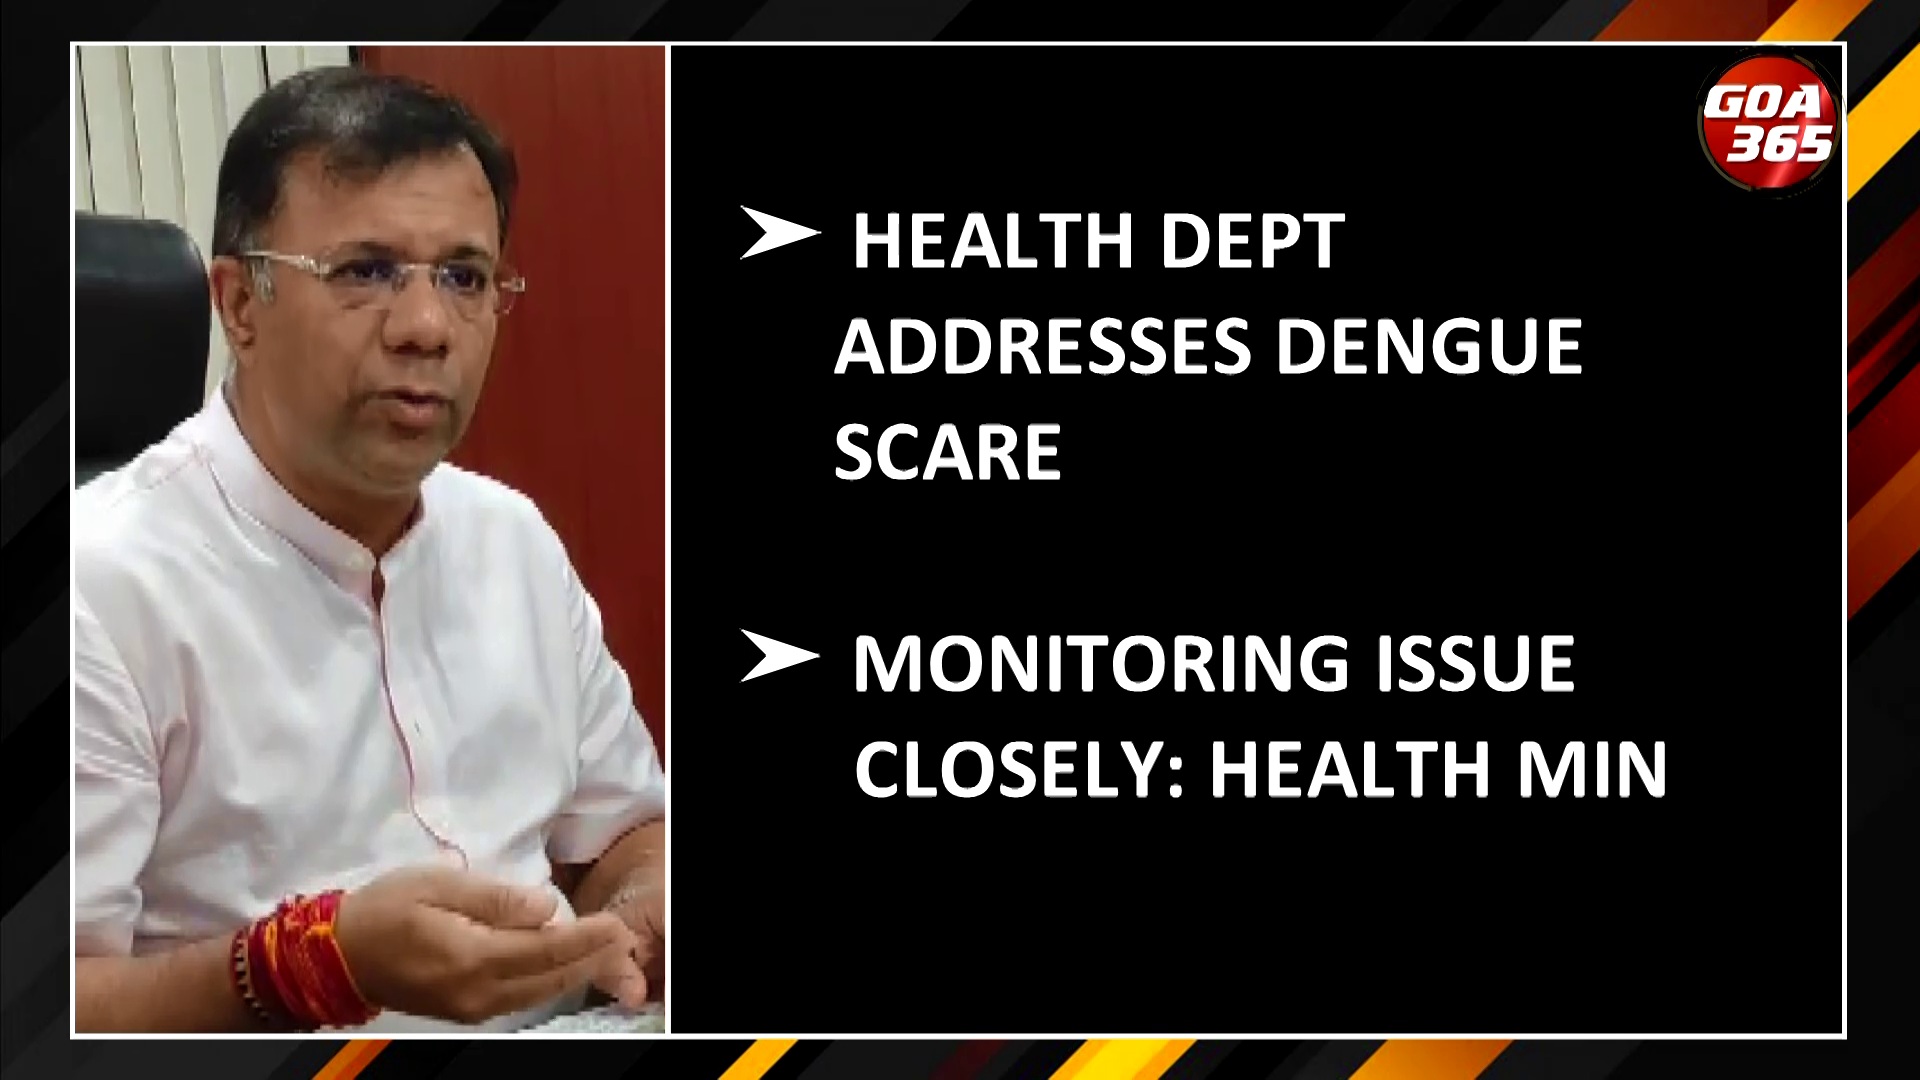 16 dengue-related deaths in Goa, this is what the health dept had to say || ENGLISH || GOA365